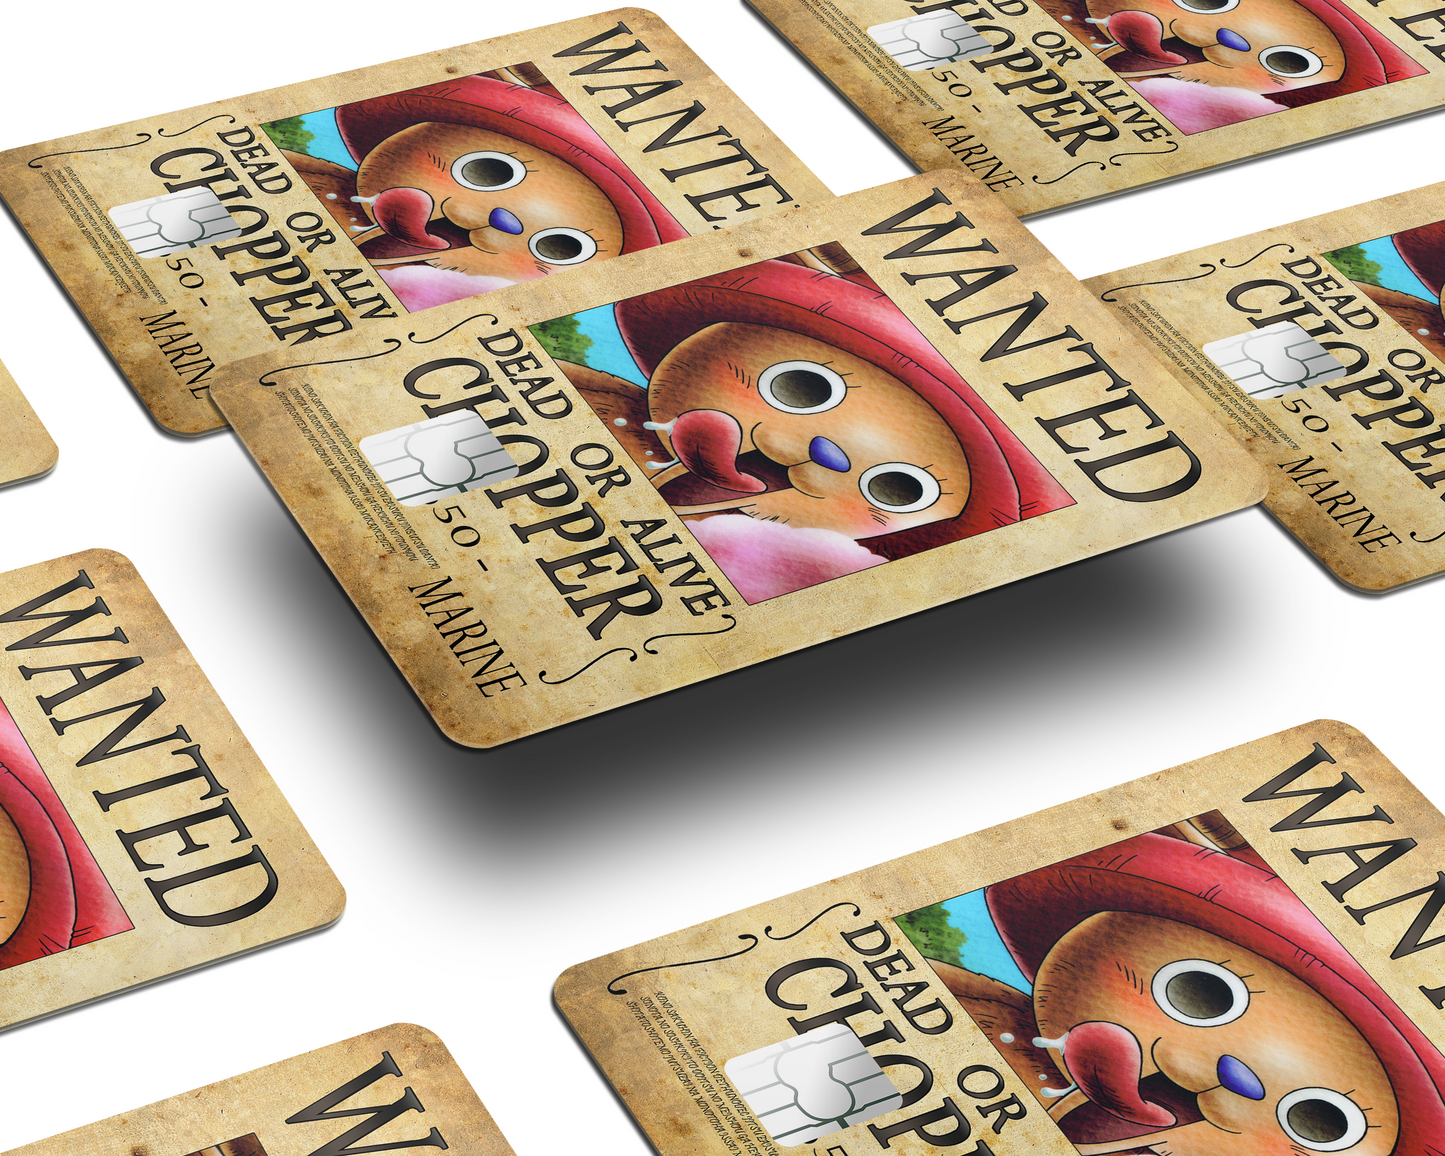 Anime Town Creations Credit Card One Piece Chopper Wanted Poster Half Skins - Anime One Piece Skin